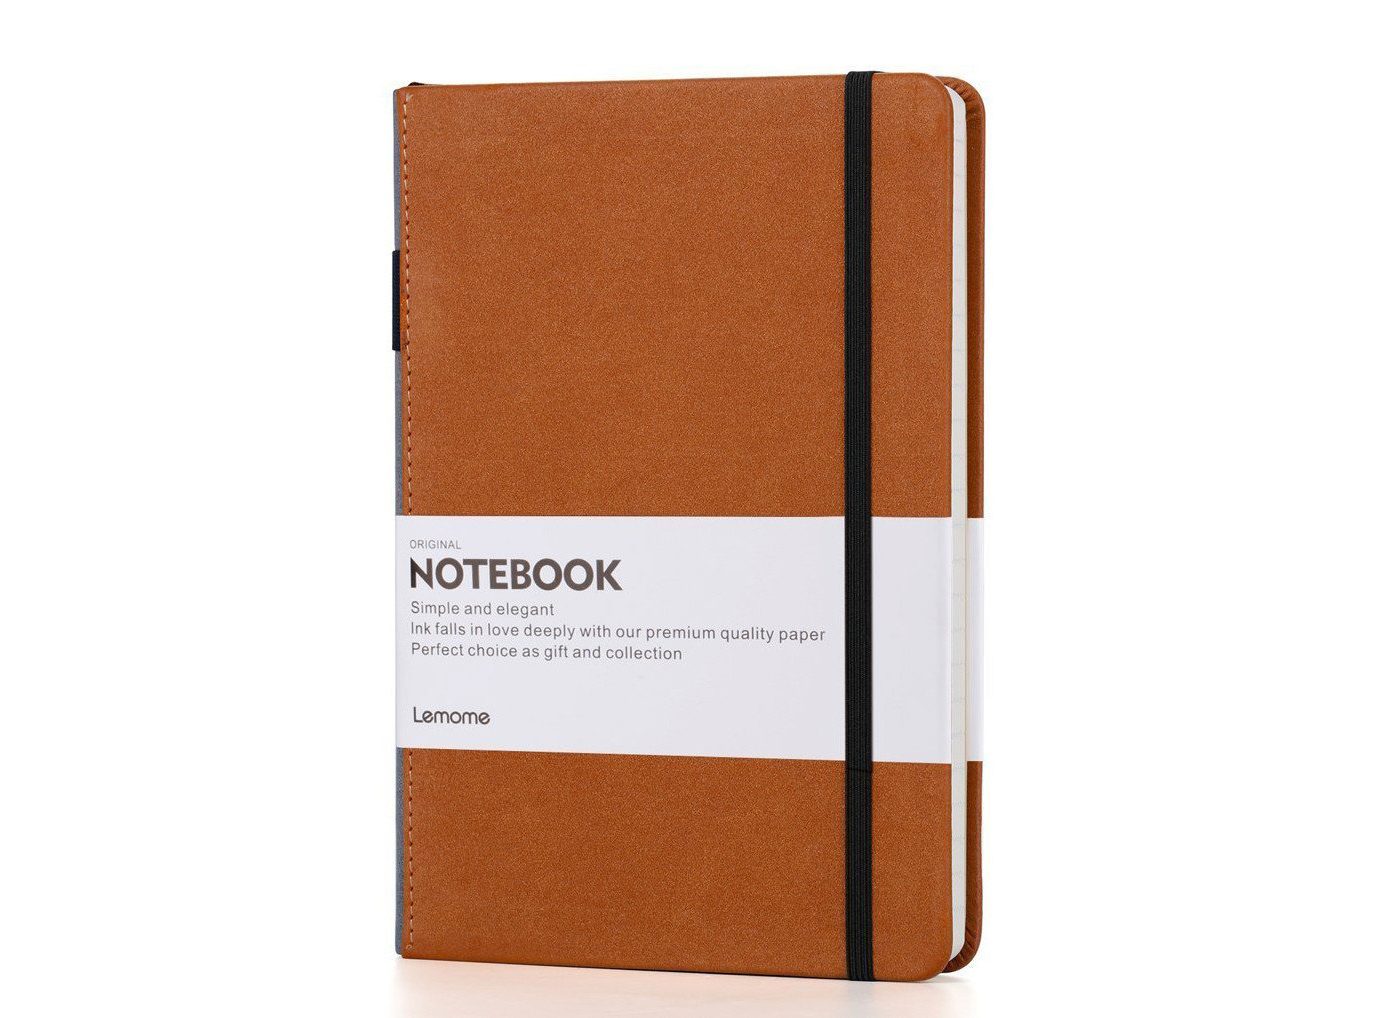 Style + Design product product design notebook accessory case